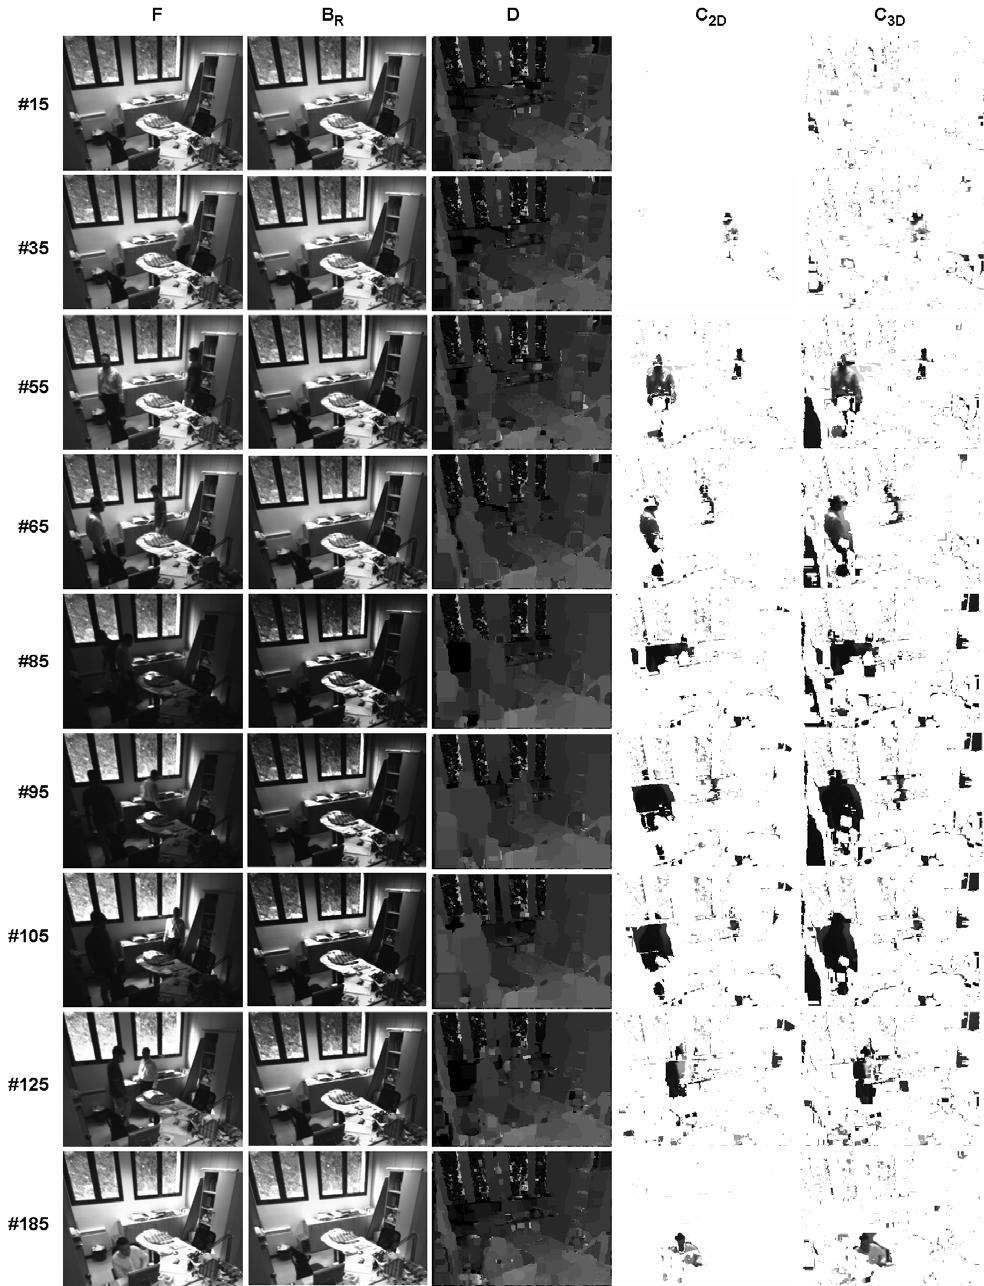 Figure 6. Experimental results on 9 frames of the Office stereo sequence using the disparity map provided by the Variable Windows [11] algorithm. (First column) - Reference image F of the stereo pair.